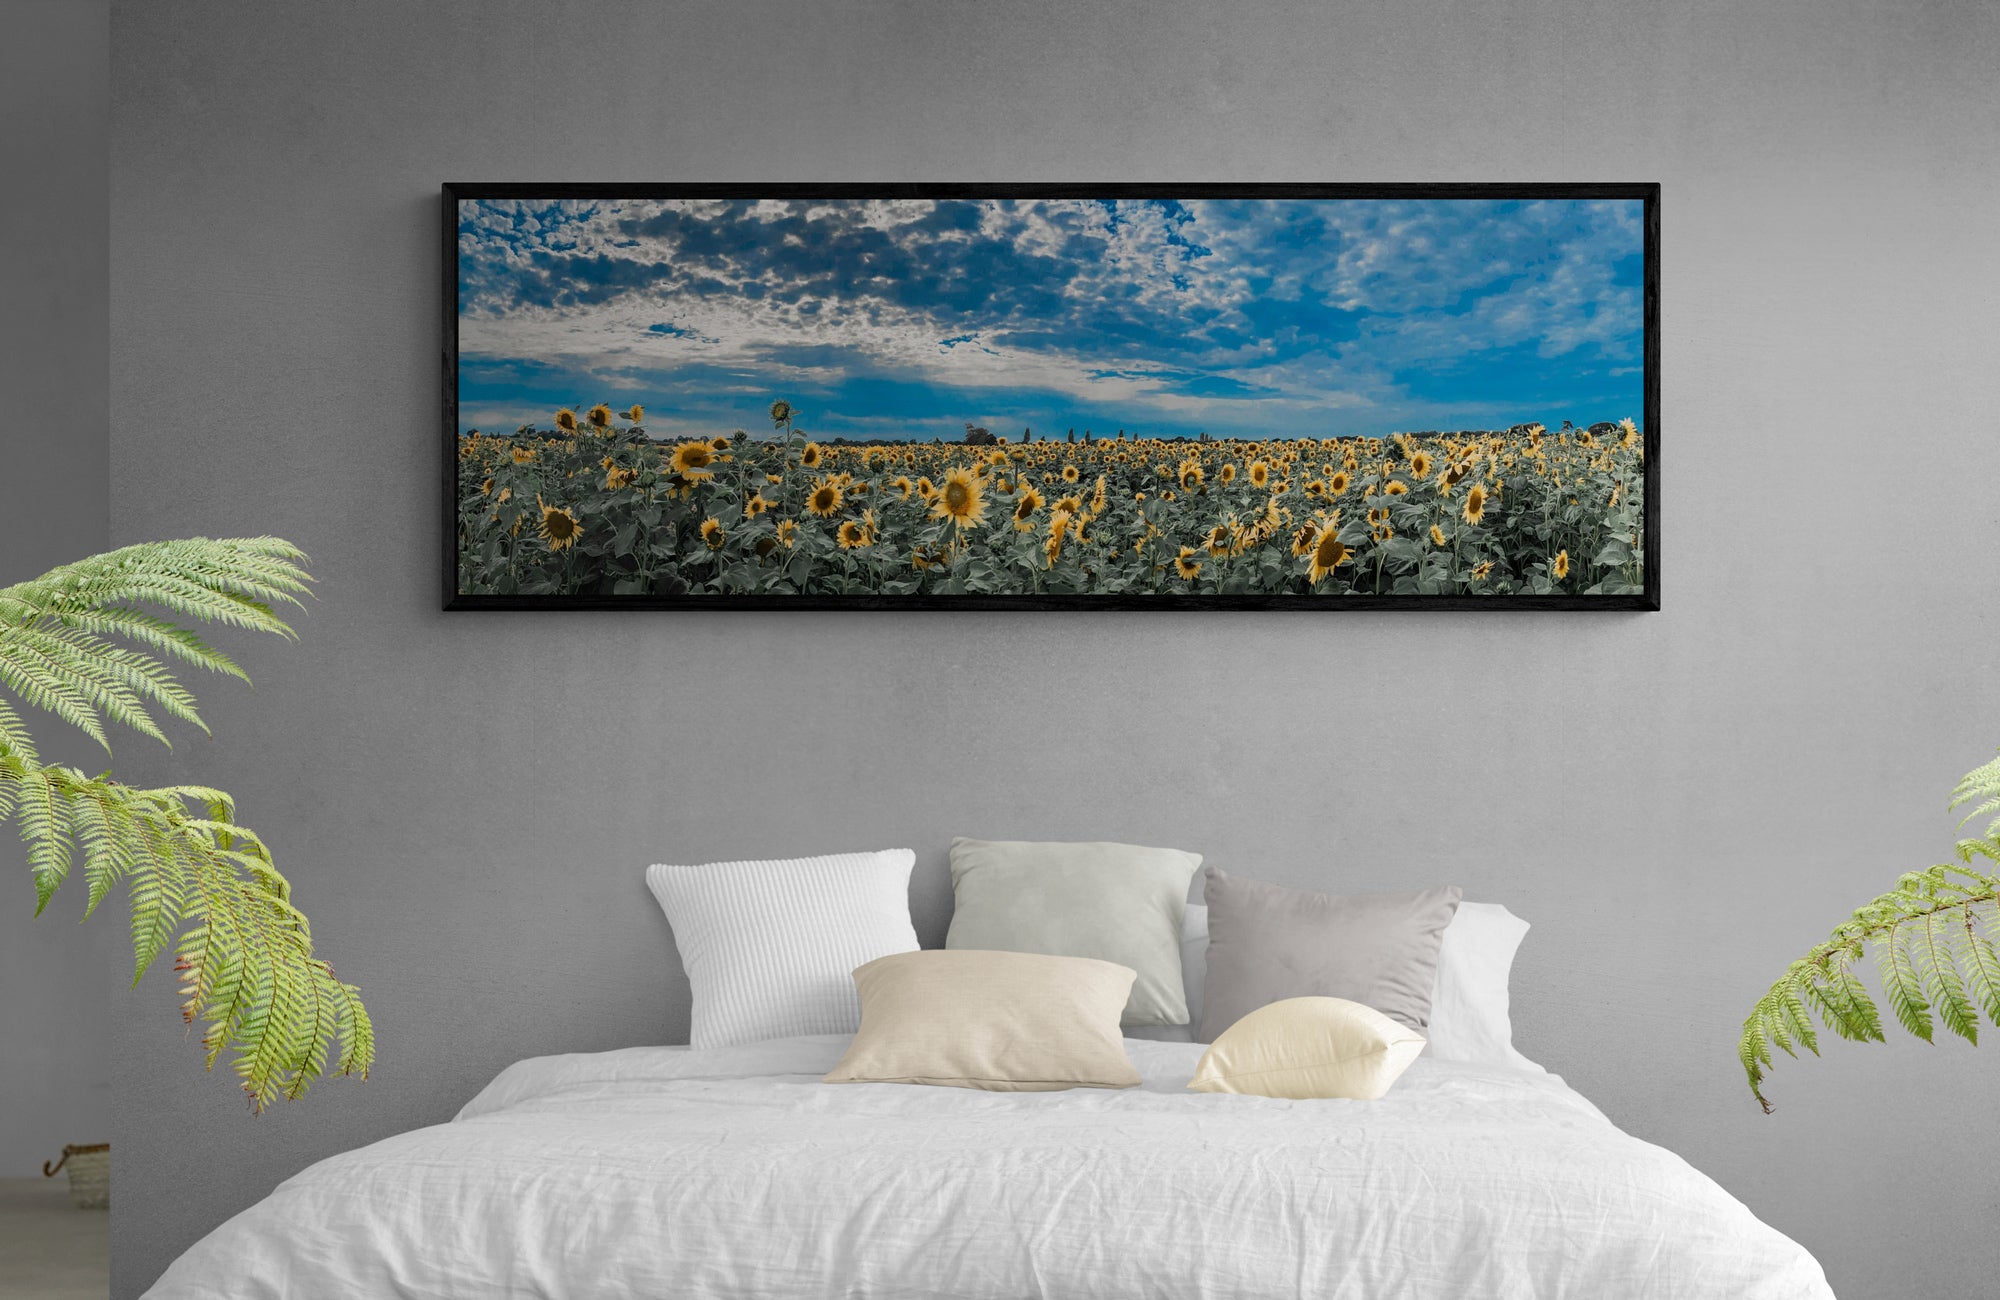 Canvas Photo Prints - to frame or not to frame